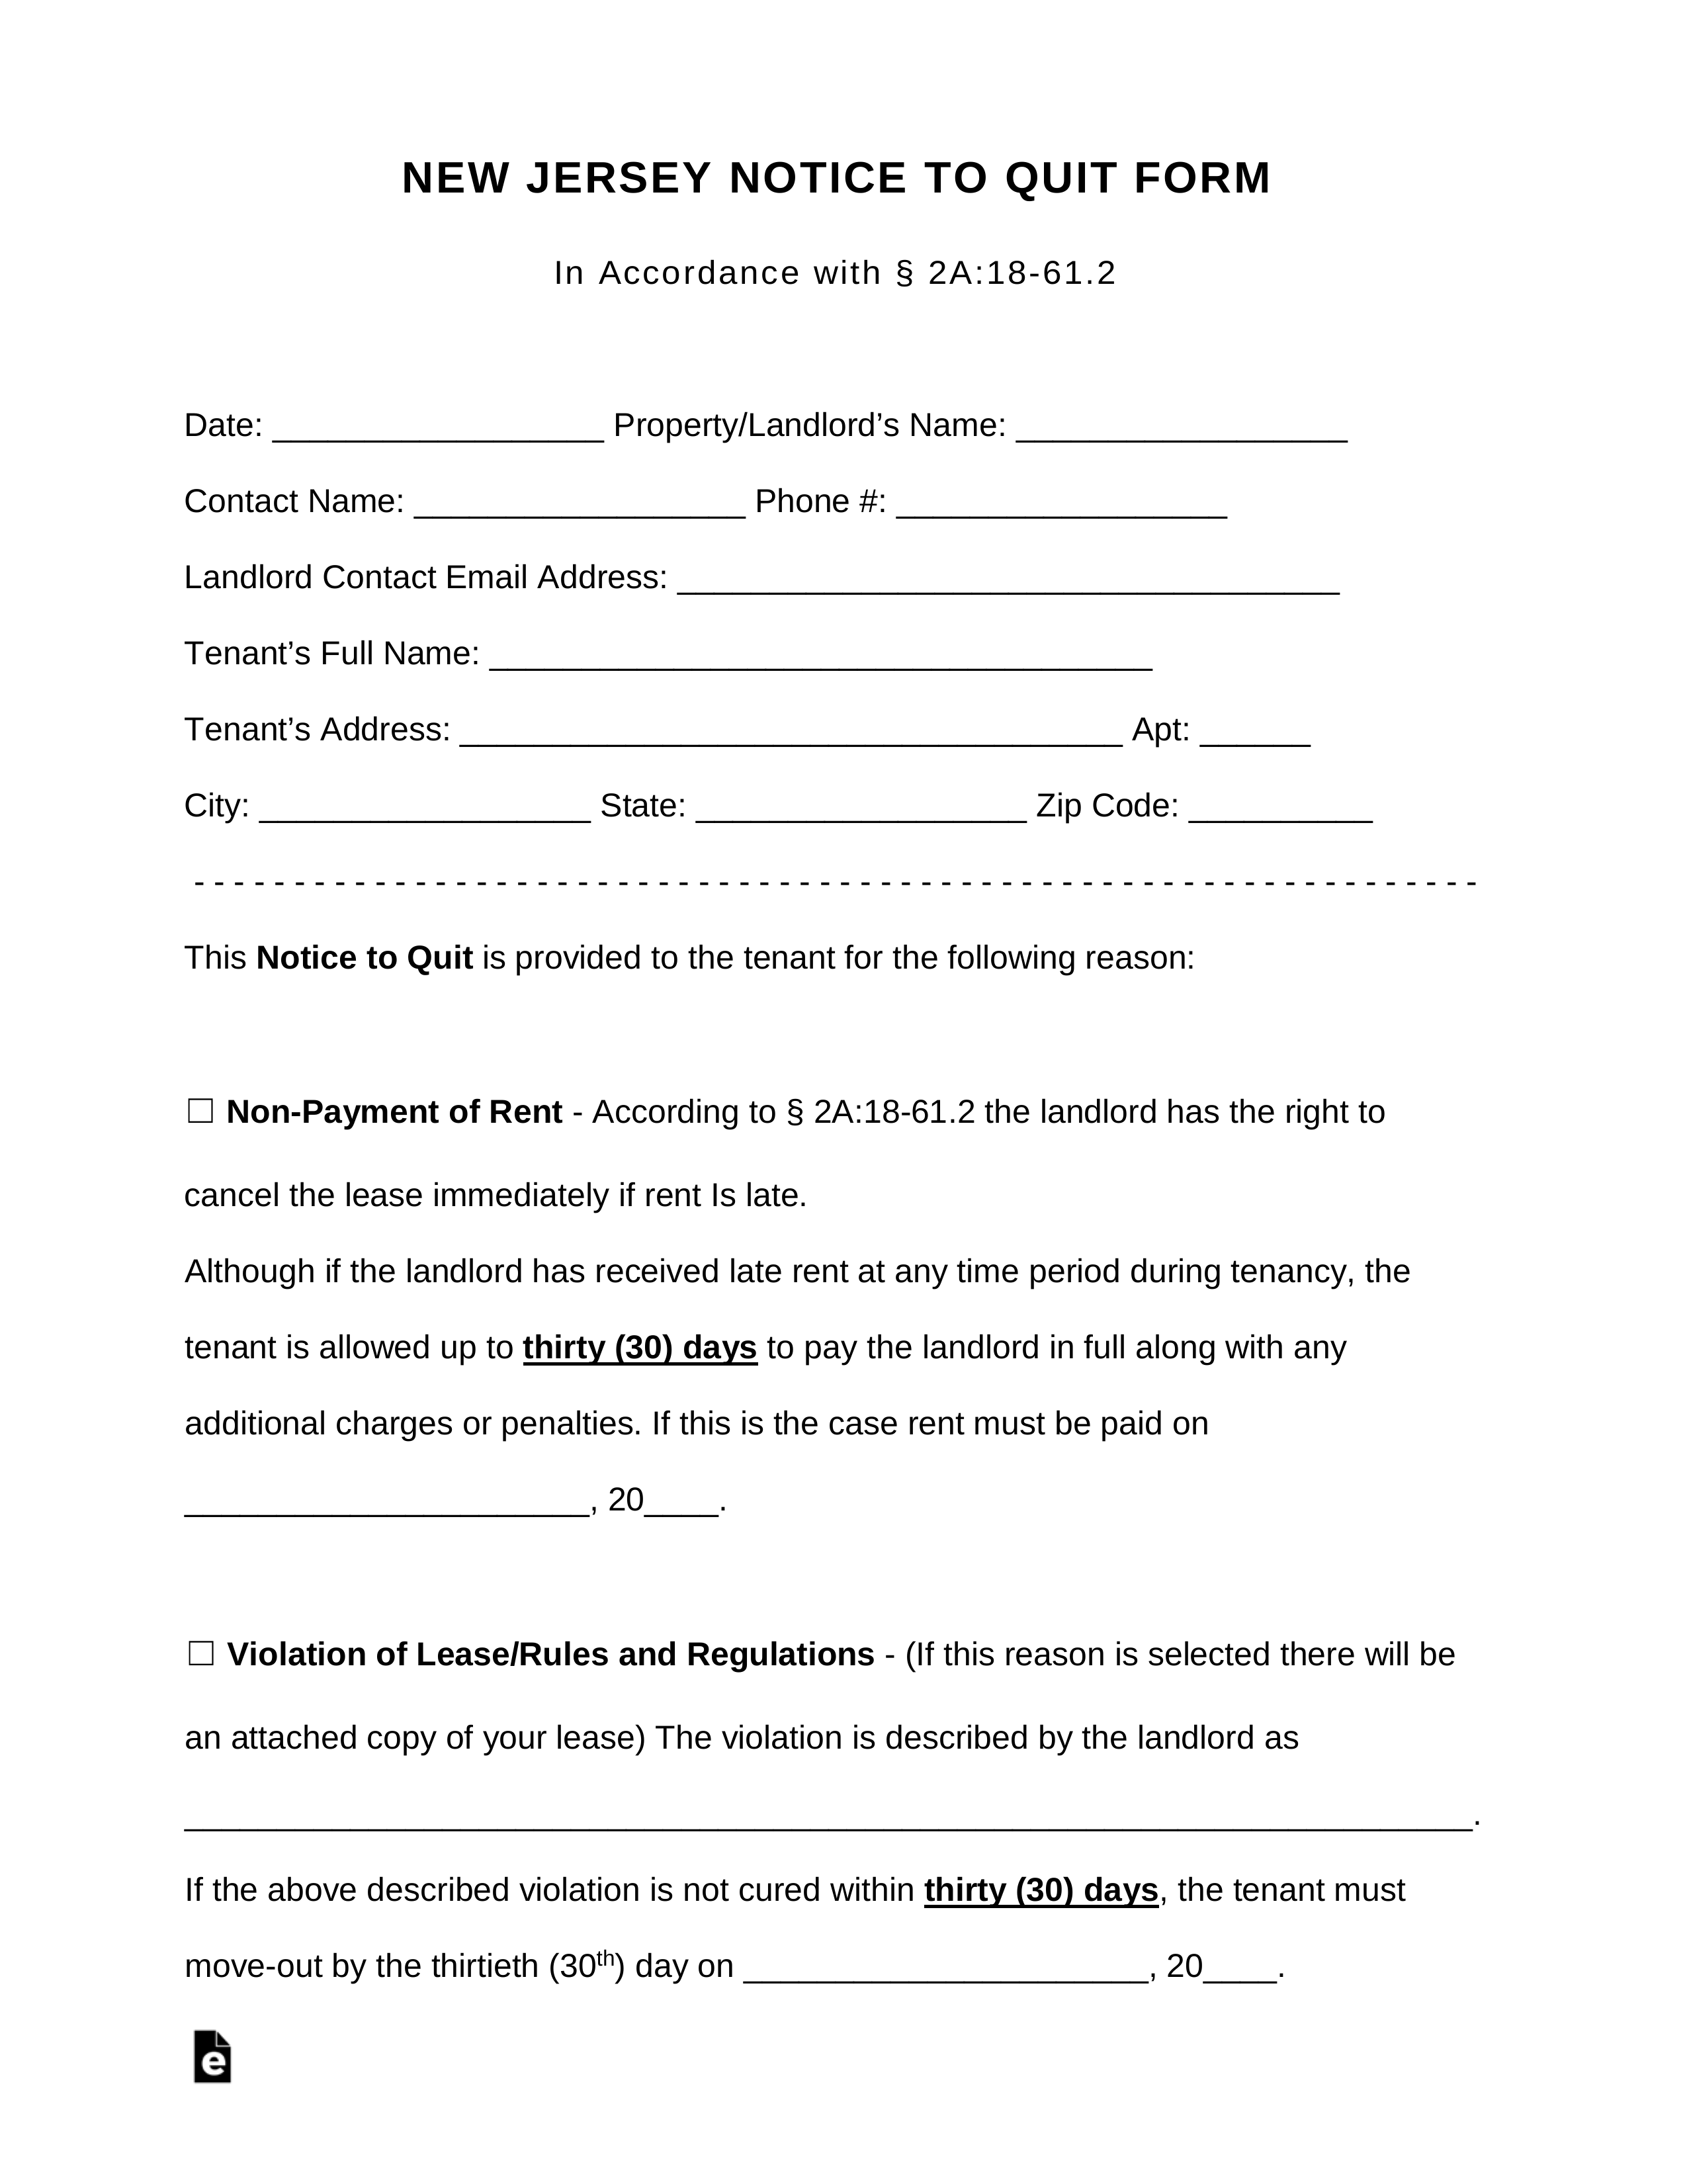 New Jersey Notice to Quit Form | For All Violation Types